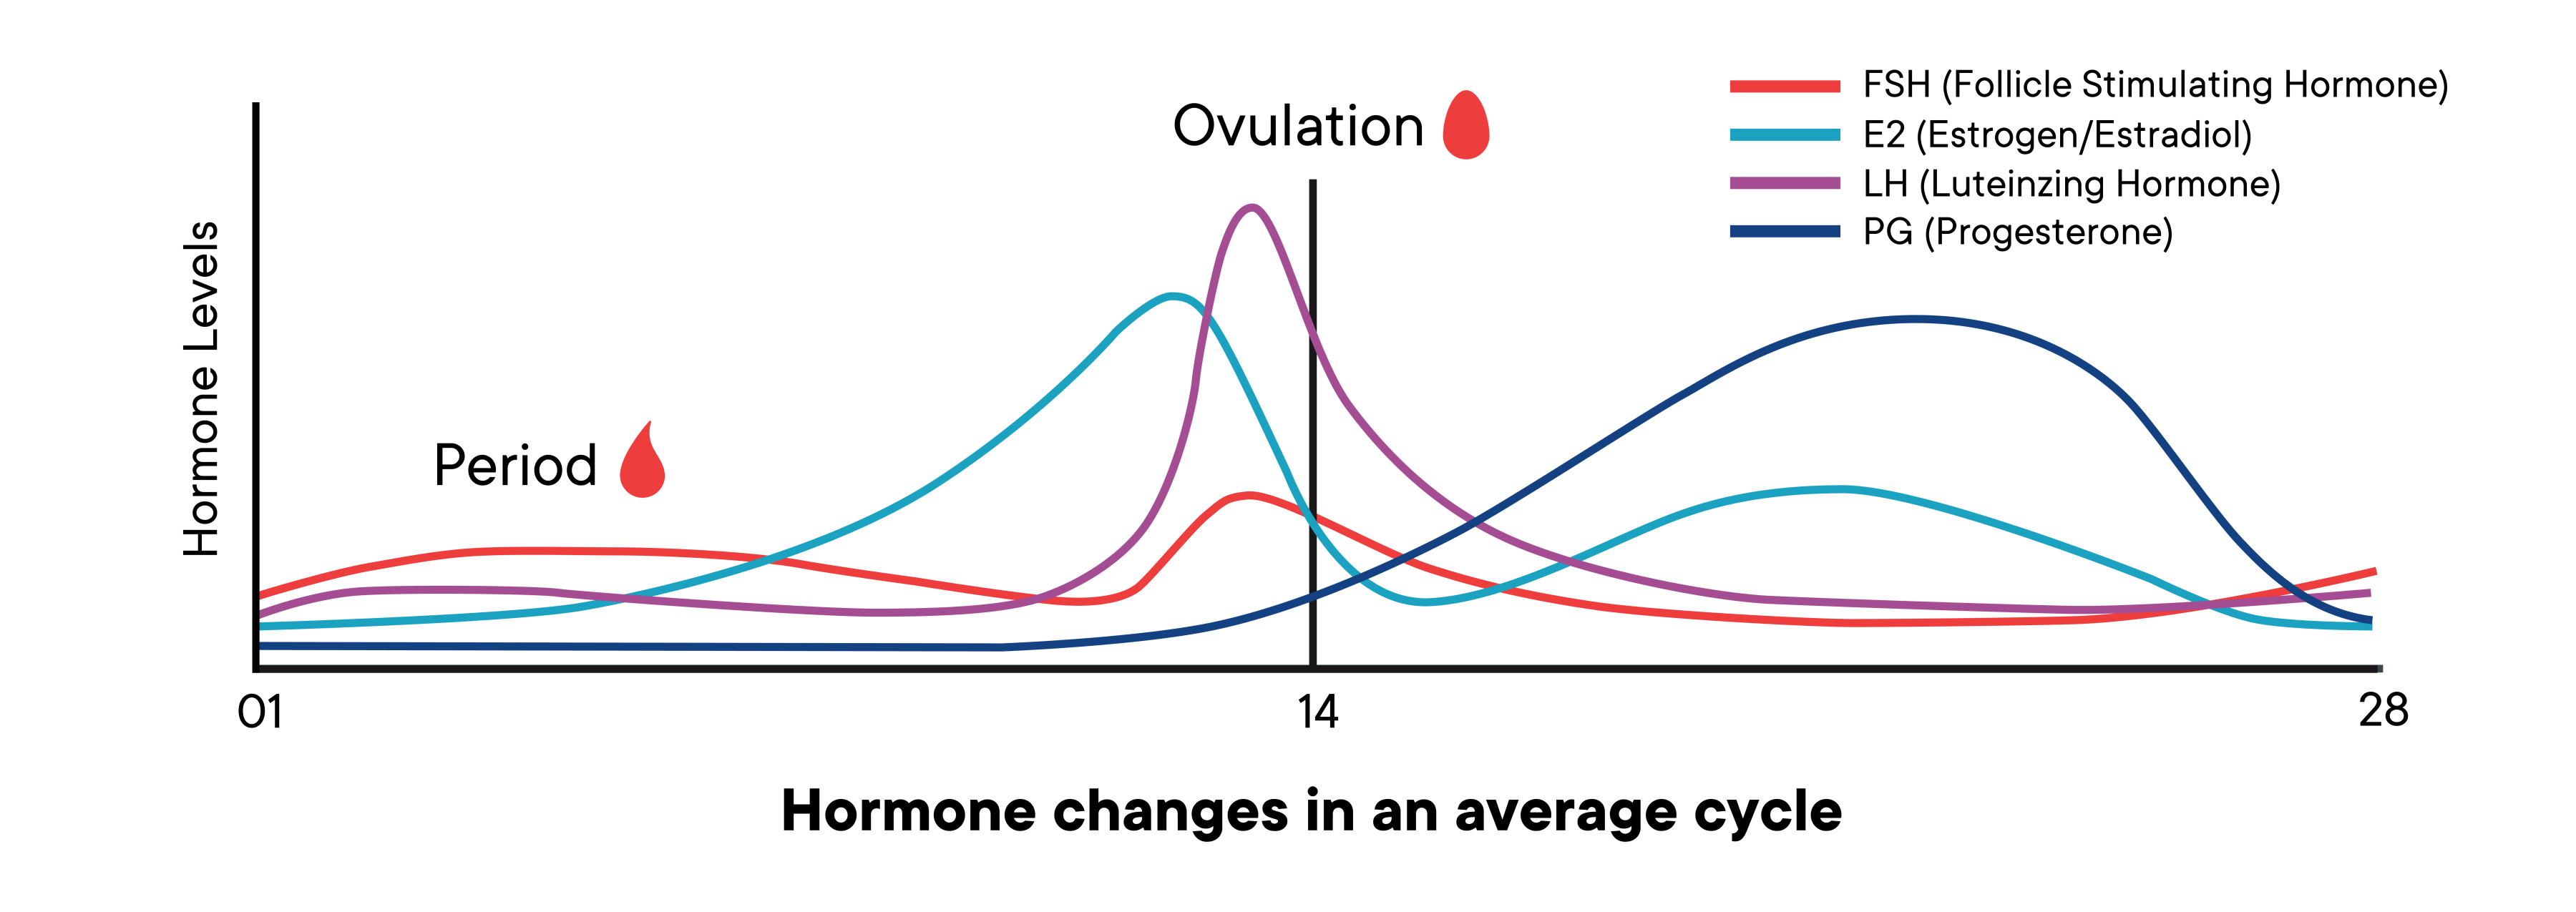 Oova - Learning when YOUR fertile window occurs is so important! The most fertile  days vary for everyone based on their unique cycles, hormone levels, and  overall fertility profiles. Depending on whether